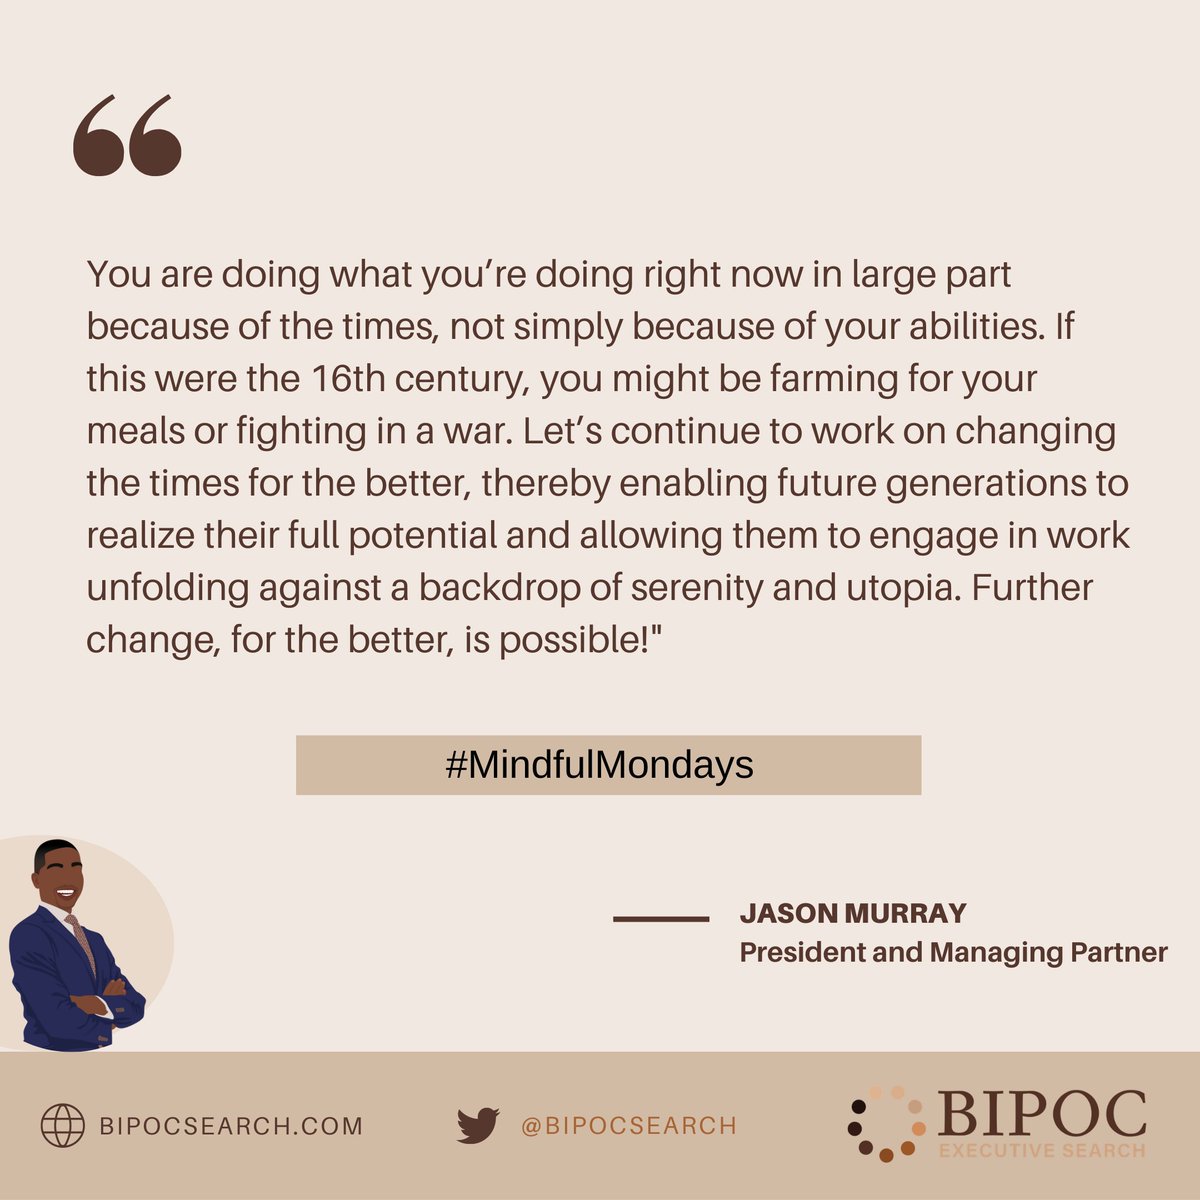 Our President and Managing Partner, Jason Murray, gently remind us, that our work right now, is planting seeds for the future. So, keep at it!                                               

#MindfulMondays #MindfulQuote #ExperiencesThatMatter #BipocExecutiveSearch #JasonMurray